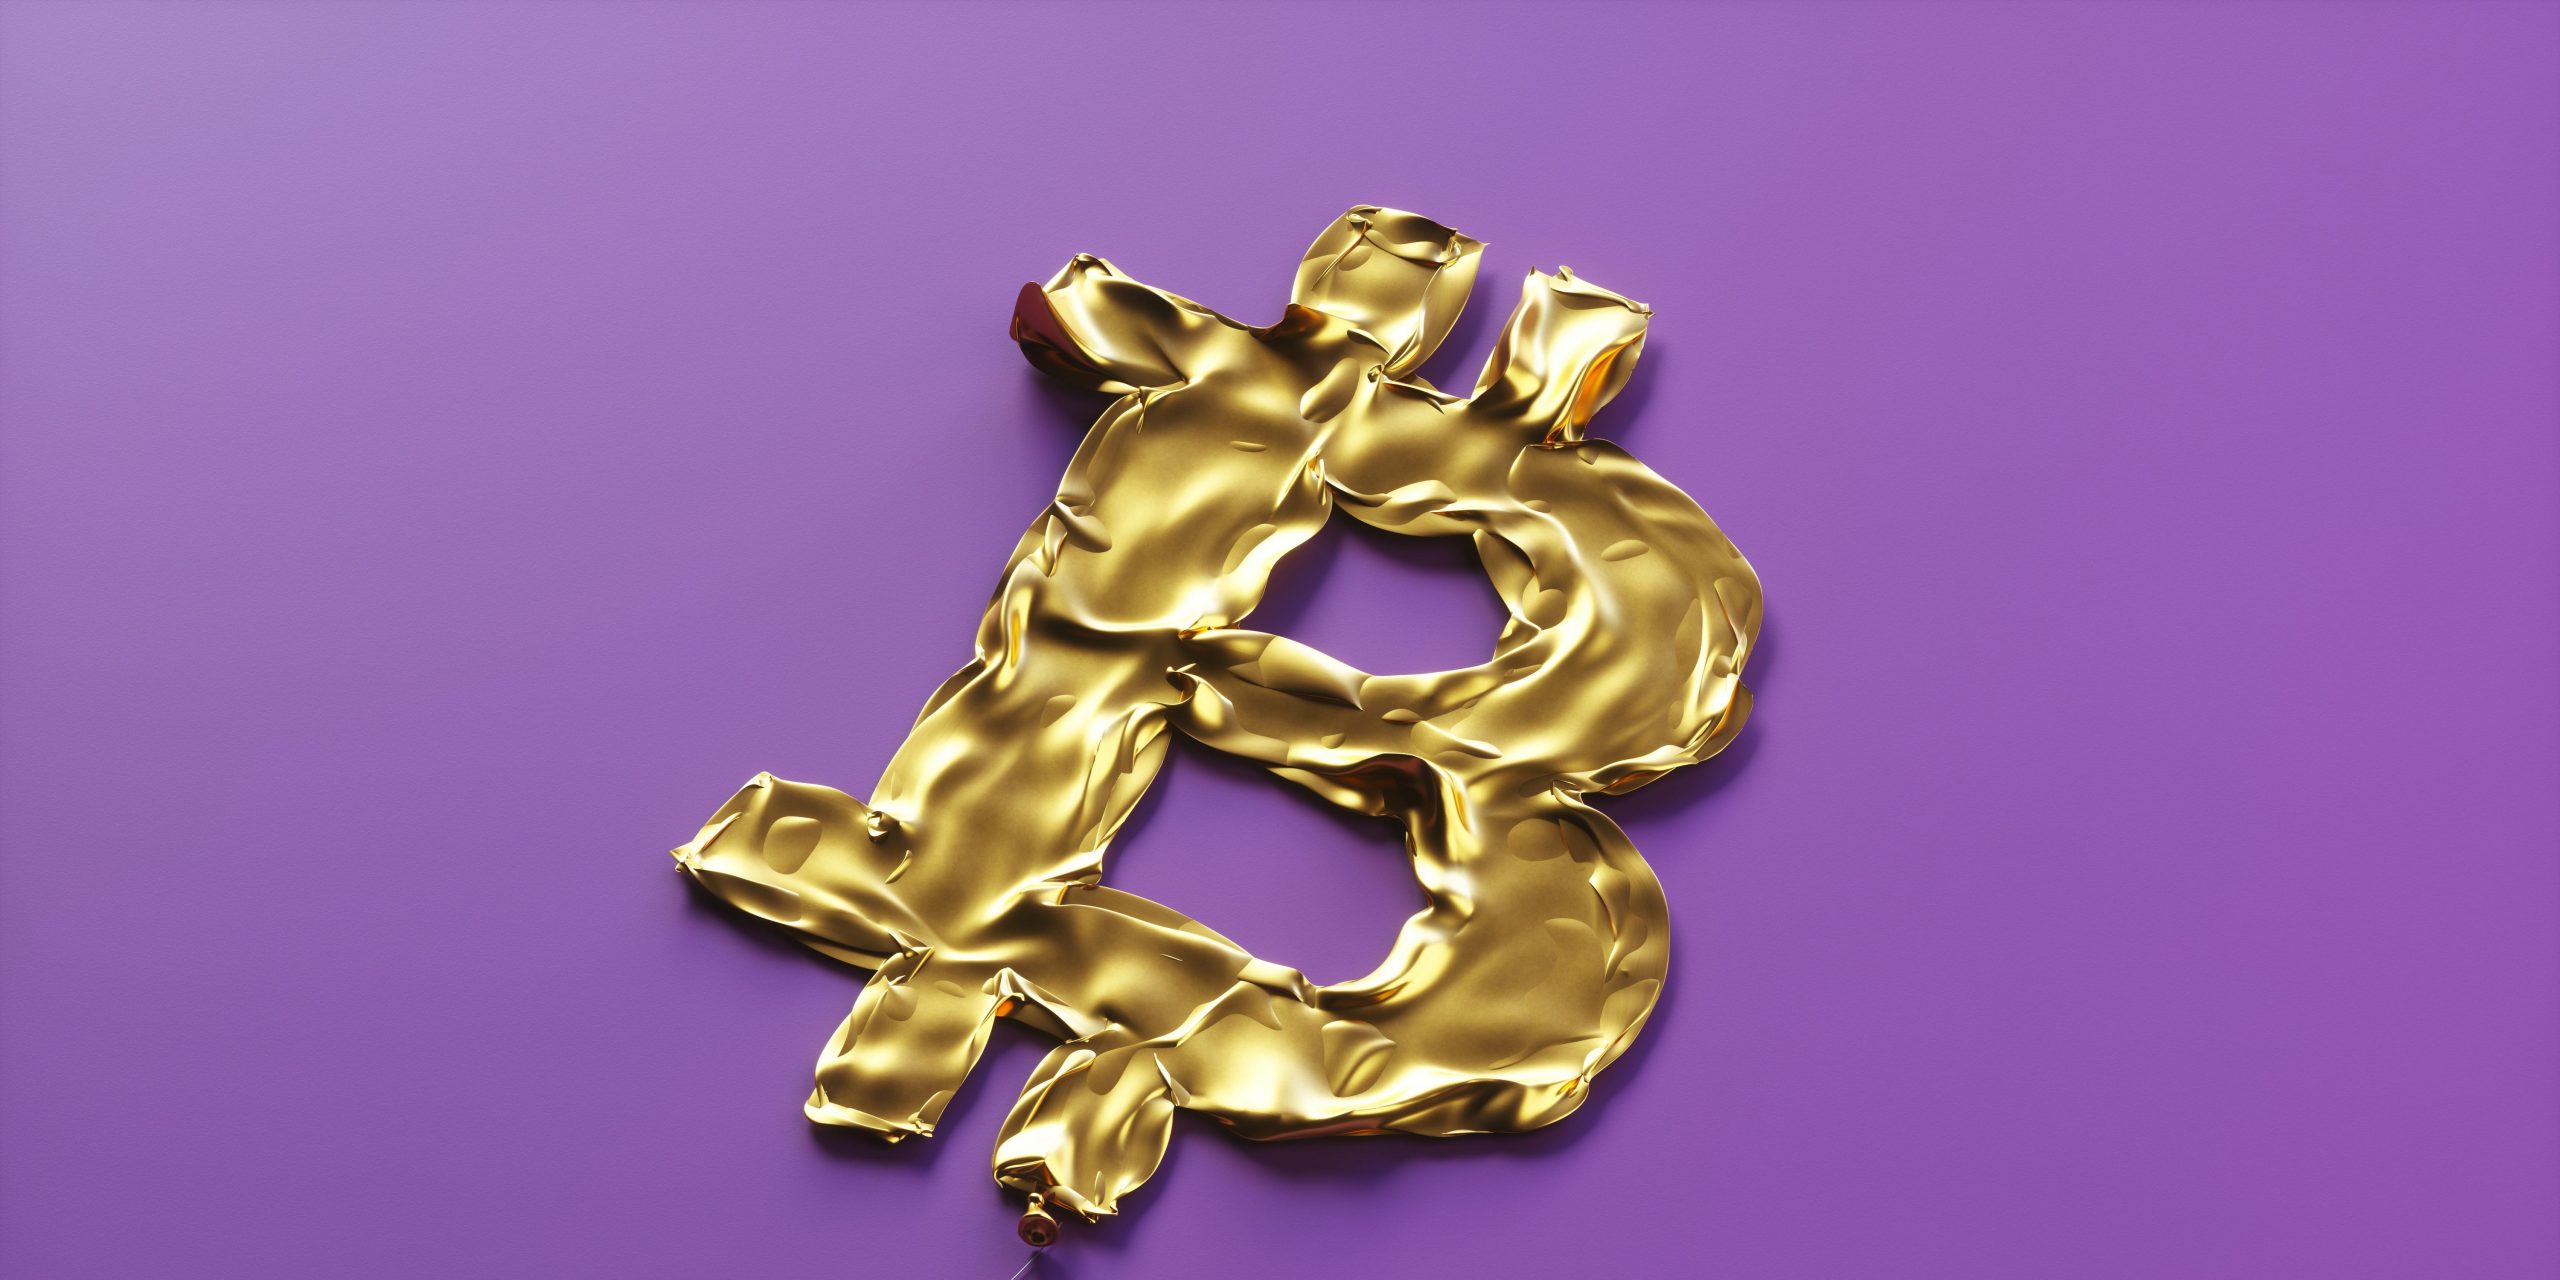 Purple and gold bitcoin